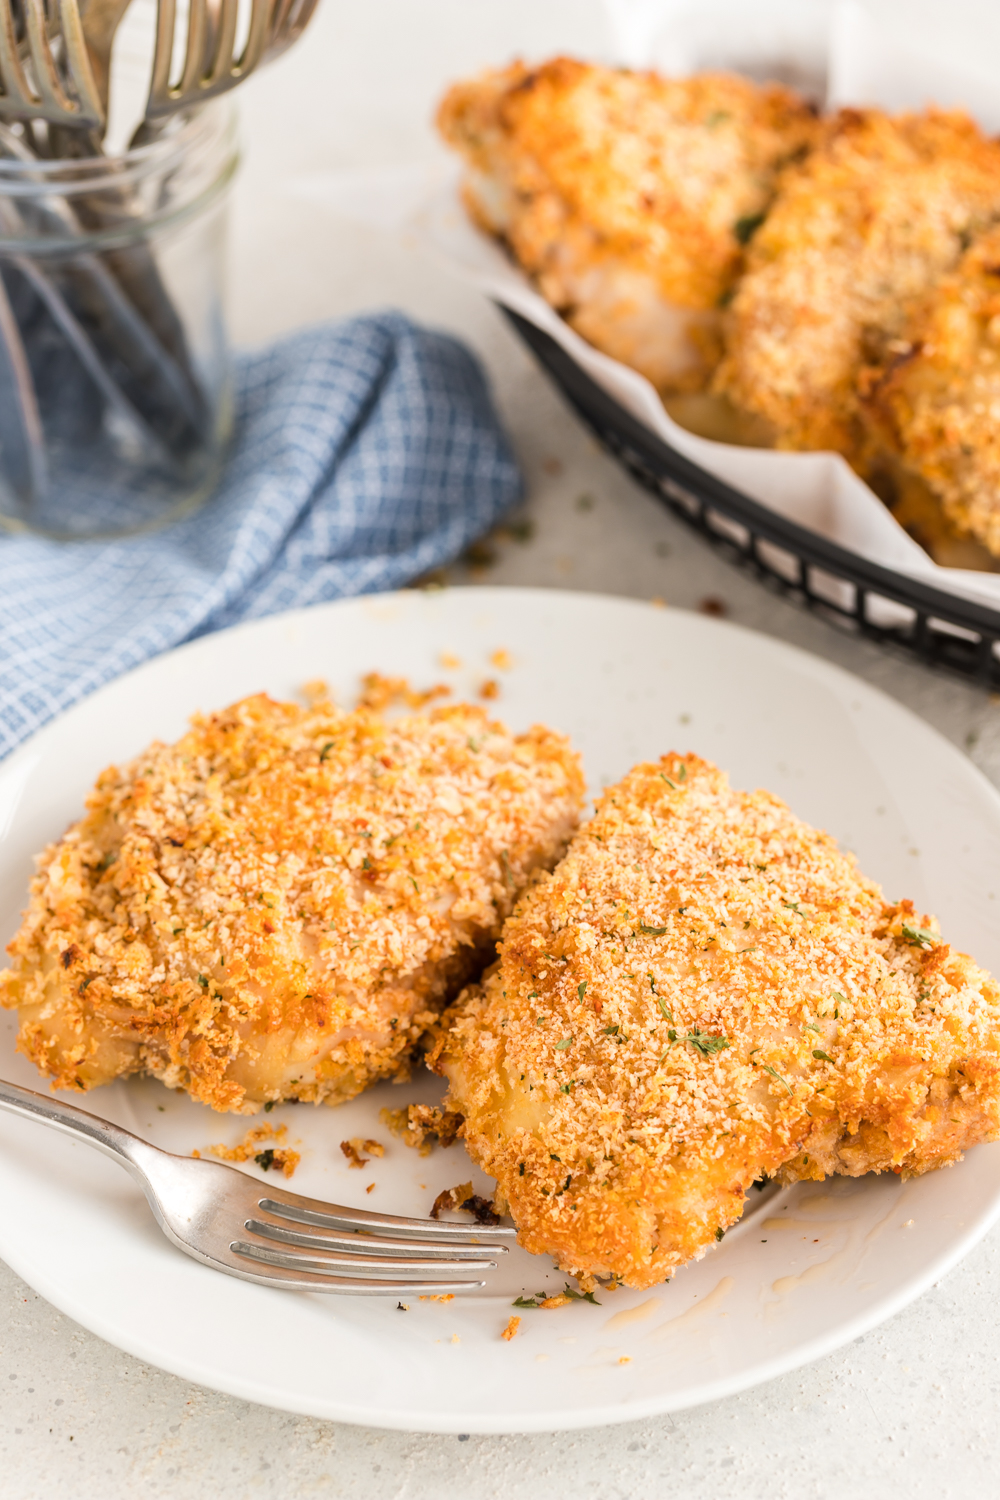 Panko Oven Fried Chicken: a delicious fried chicken recipe that is baked. It's crispy on the outside and juicy on the inside - just the way fried chicken should be! 